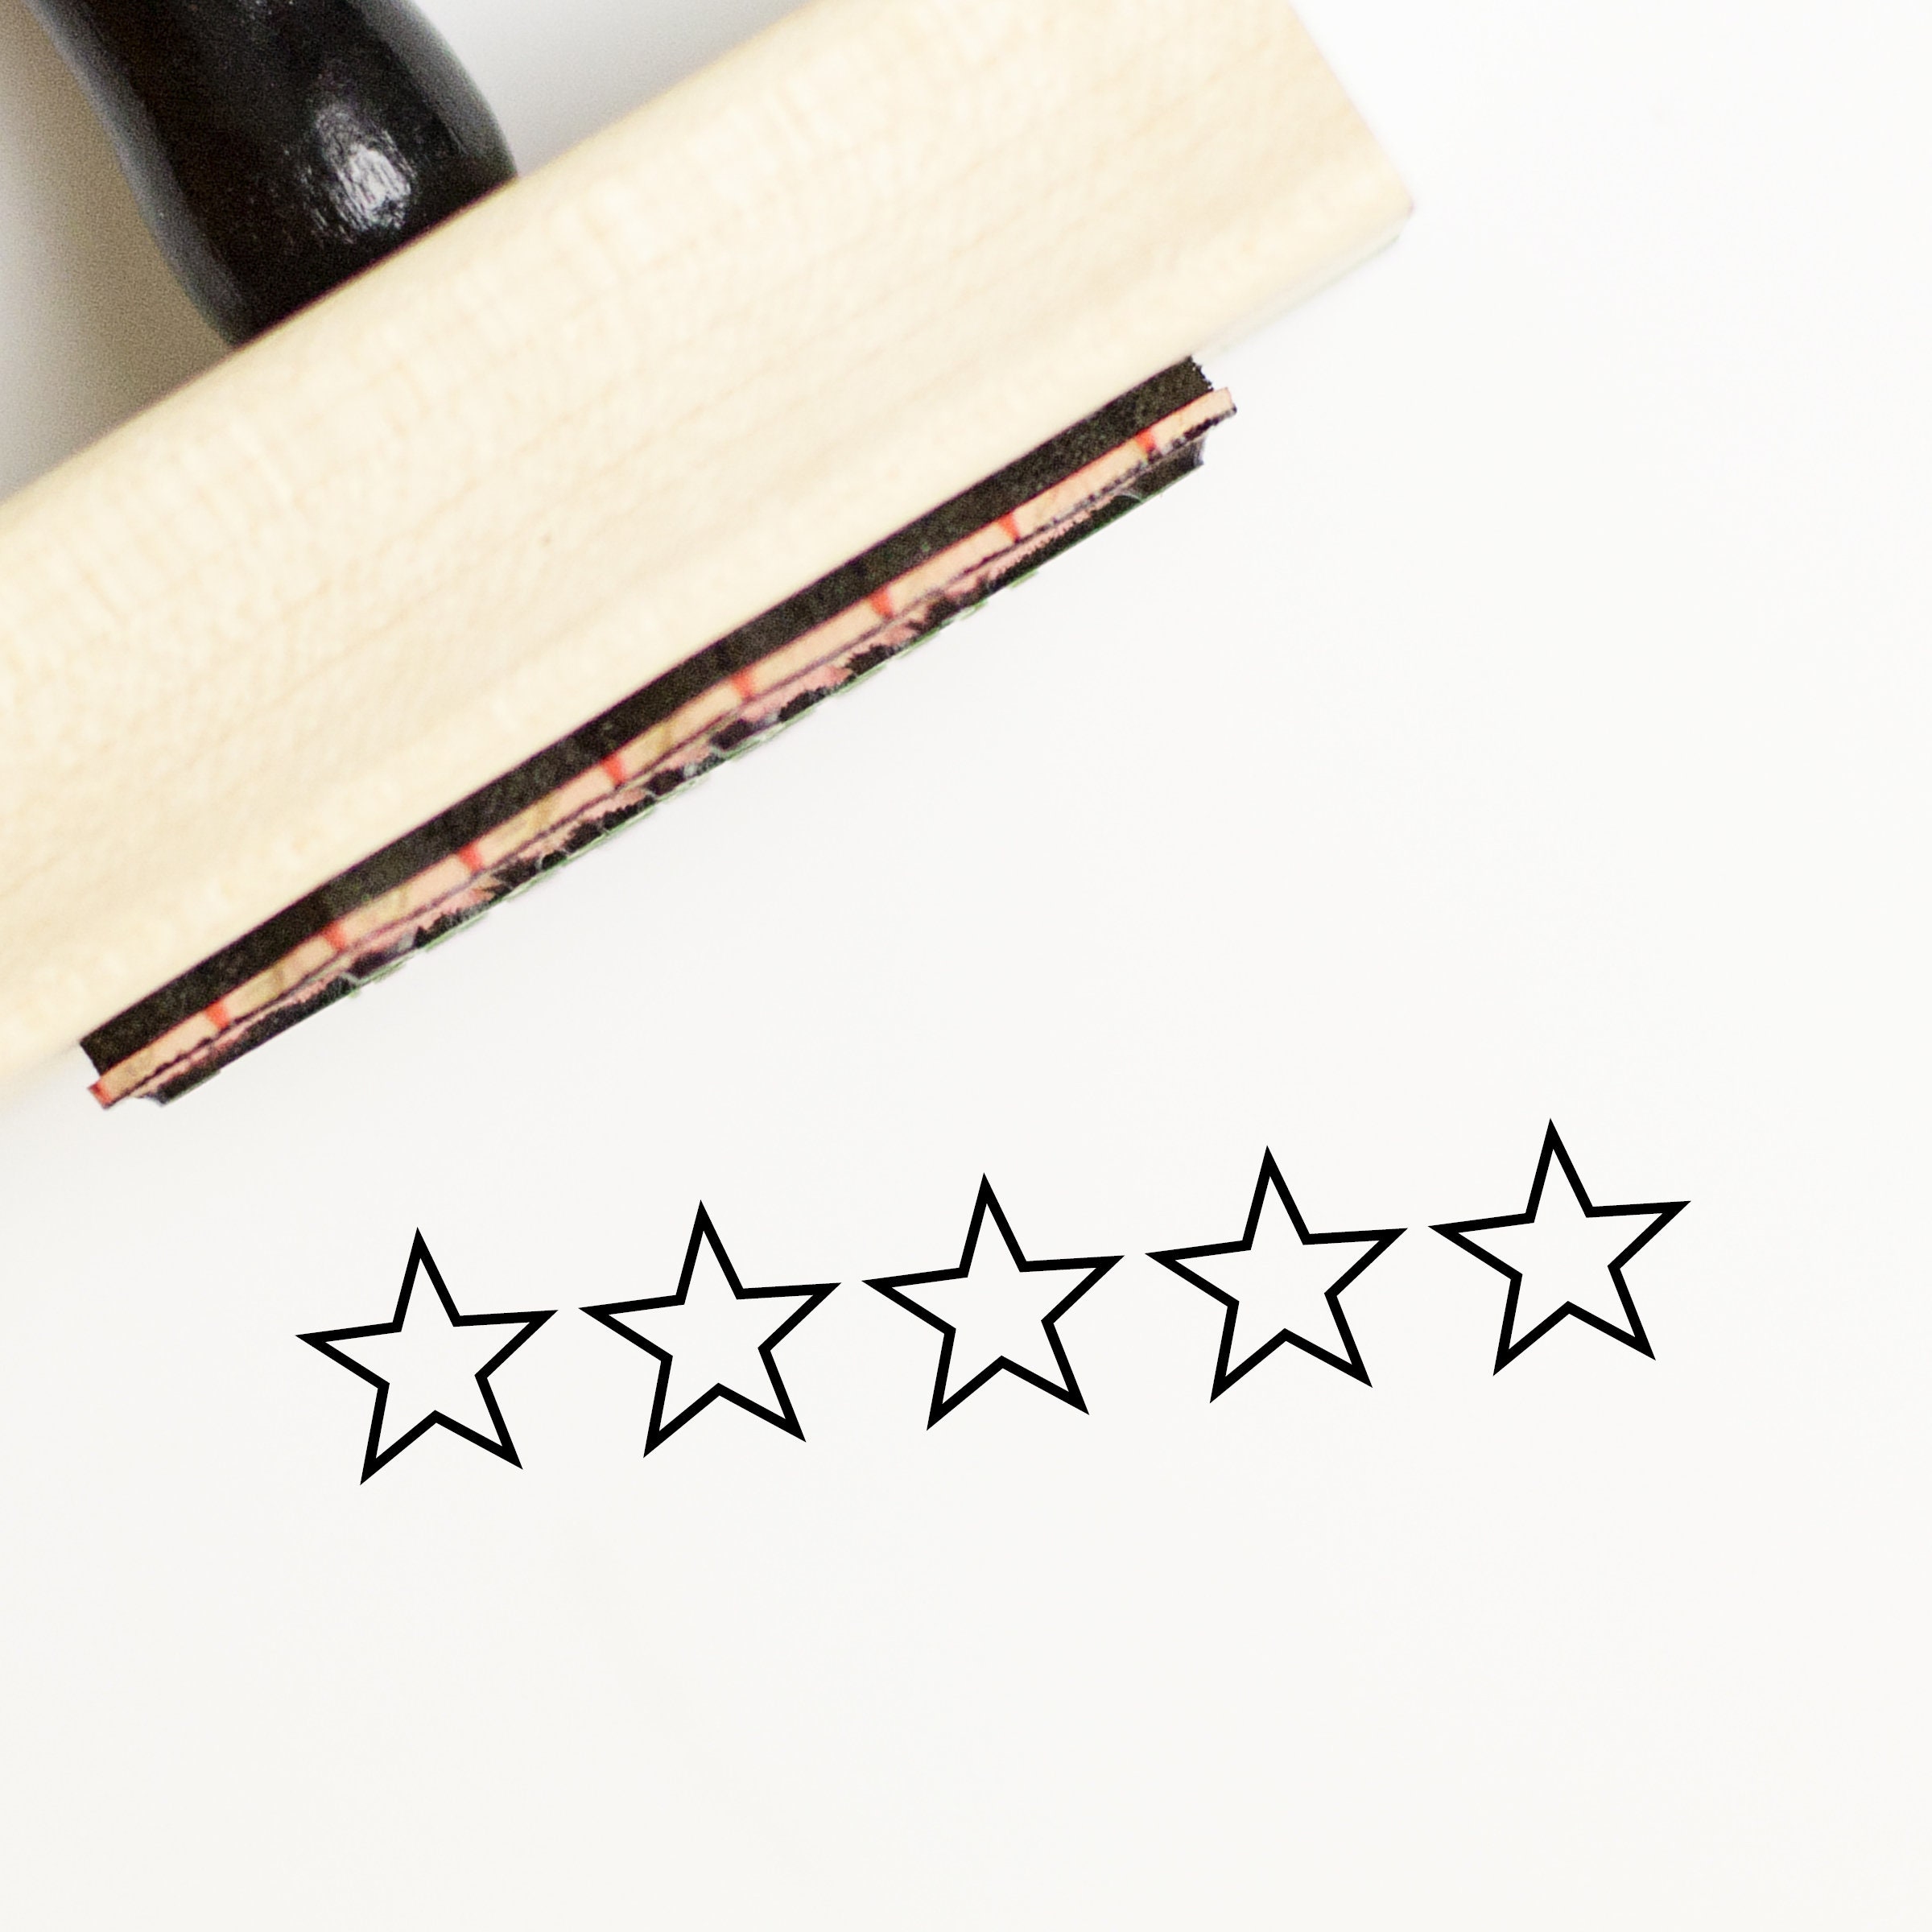 Star Rating Stamp Book Rating Stamp Five Star Journal Stamp Feedback Stamps  Bullet Journal Stamps Five Star Review 